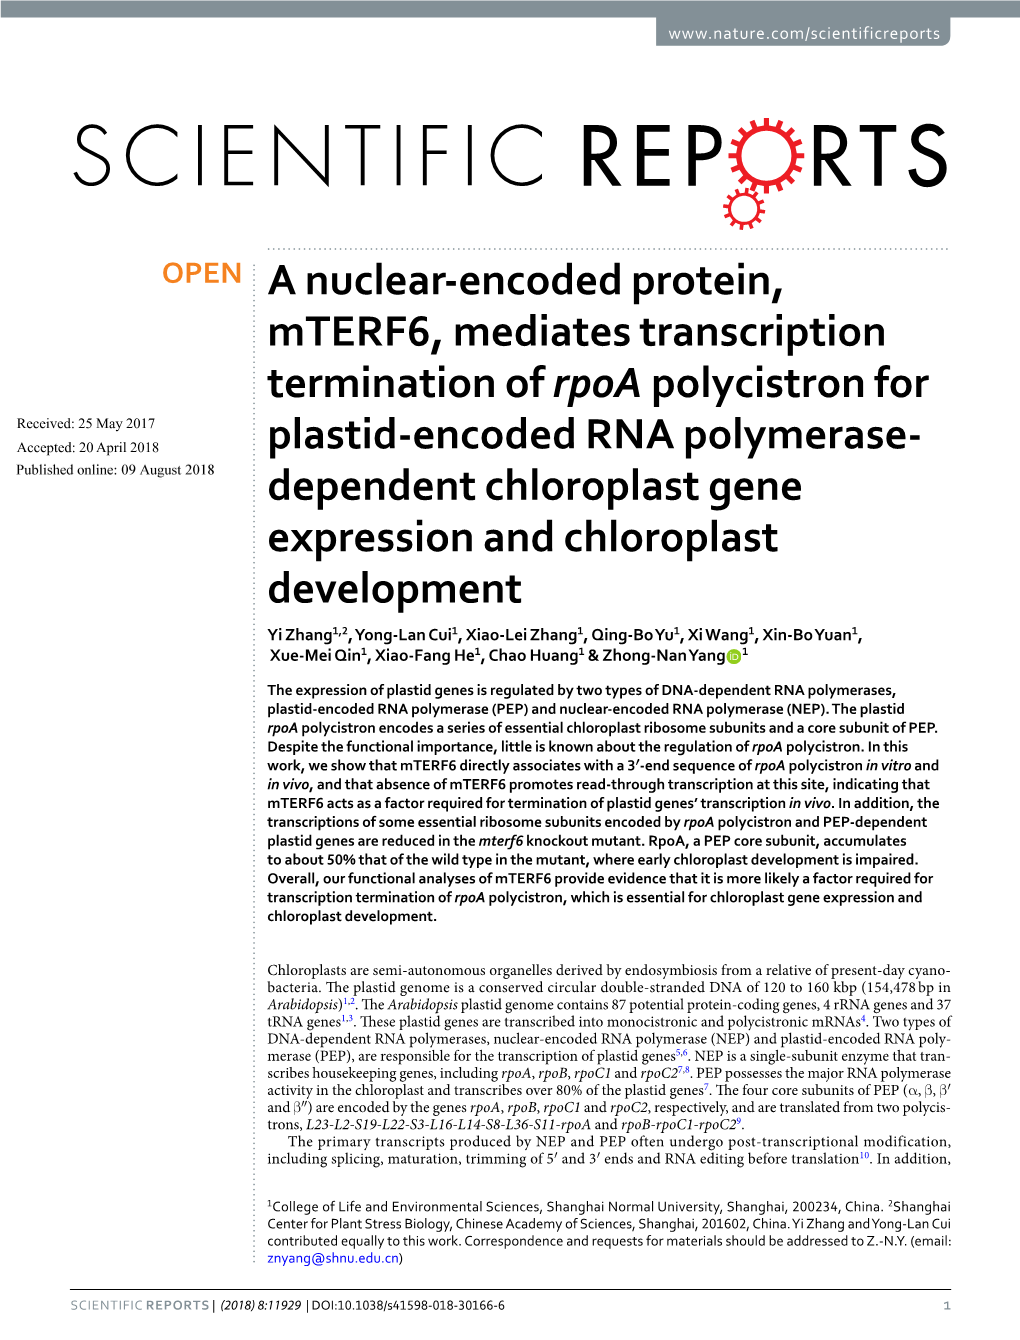 A Nuclear-Encoded Protein, Mterf6, Mediates Transcription Termination